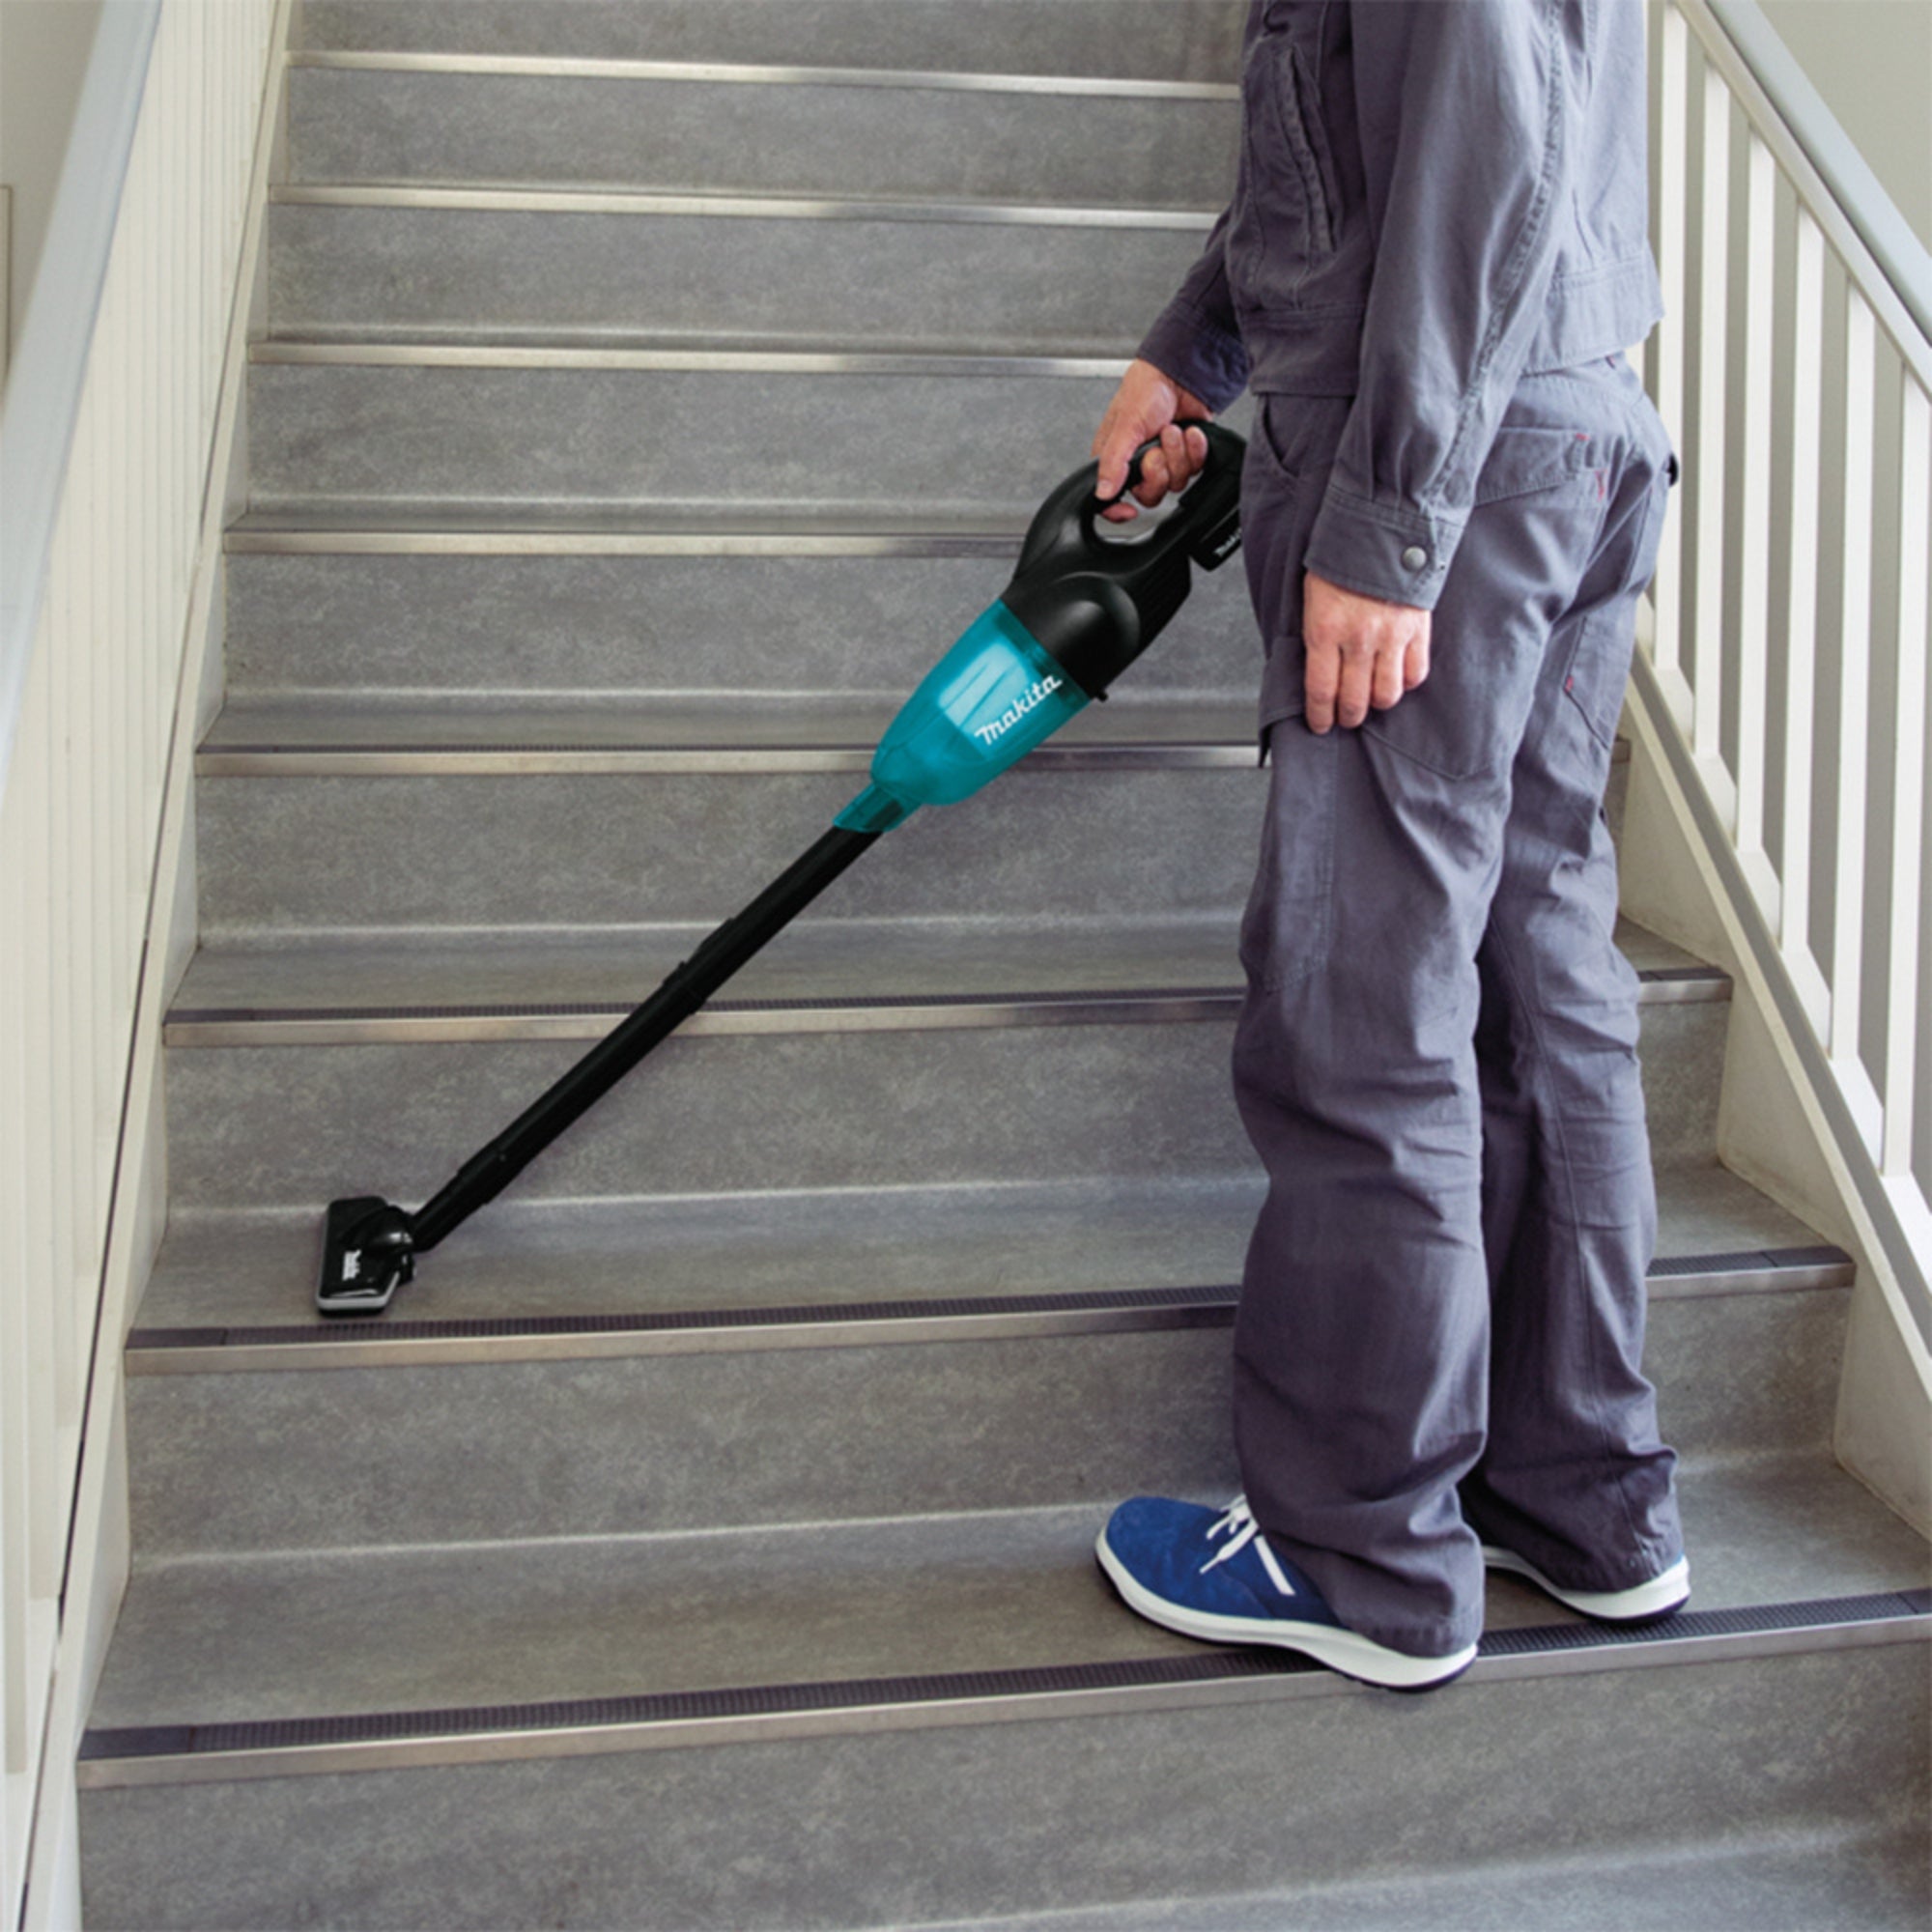 Makita DCL180SFX2 18V LXT Cordless 650ml Vacuum Cleaner w/Cyclone Attachment, Teal (3.0Ah Kit)